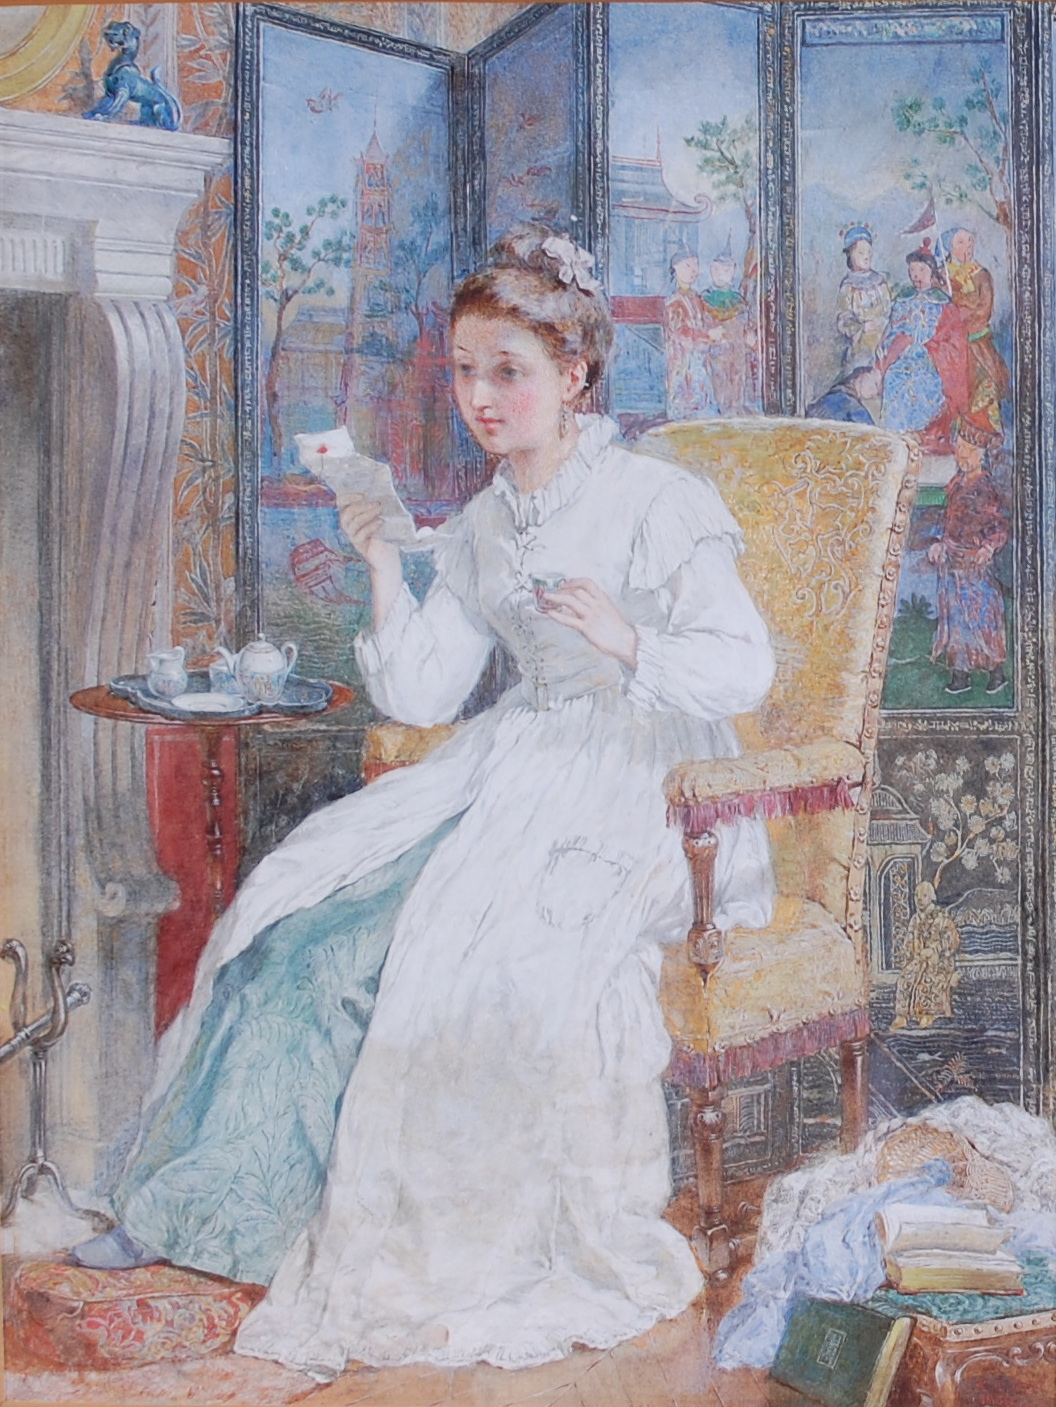 Andrew Carrick Gow RA (1848-1920) - The love letter, watercolour heightened with white, signed and